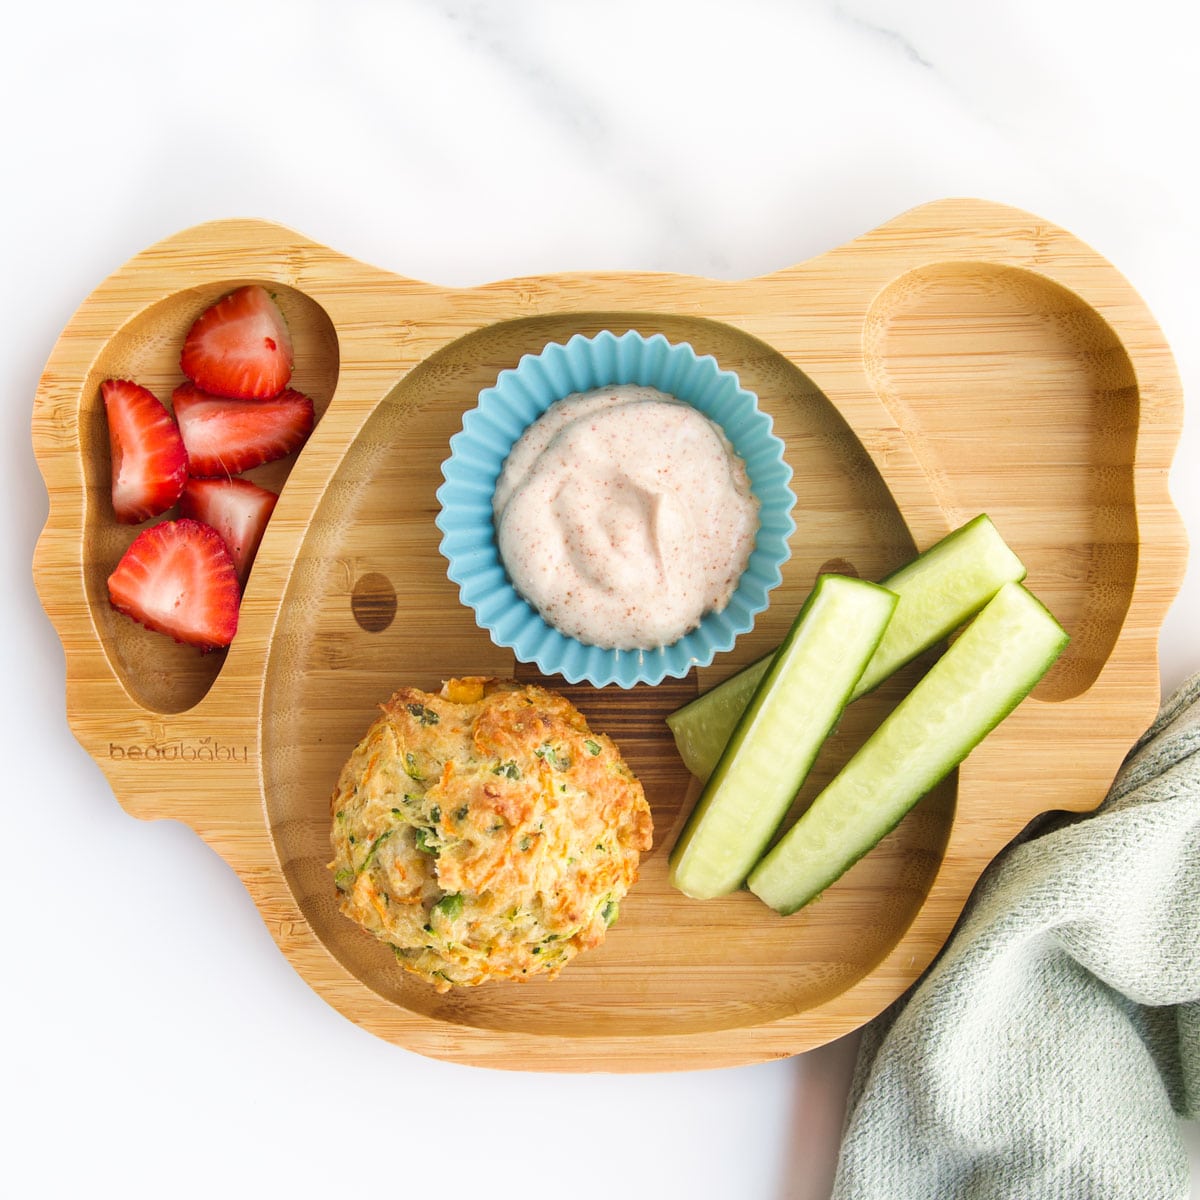 Vegetable Muffin on Bamboo Baby/Toddler Plate Served with Cucumber Sticks, Dip and Strawberries. 